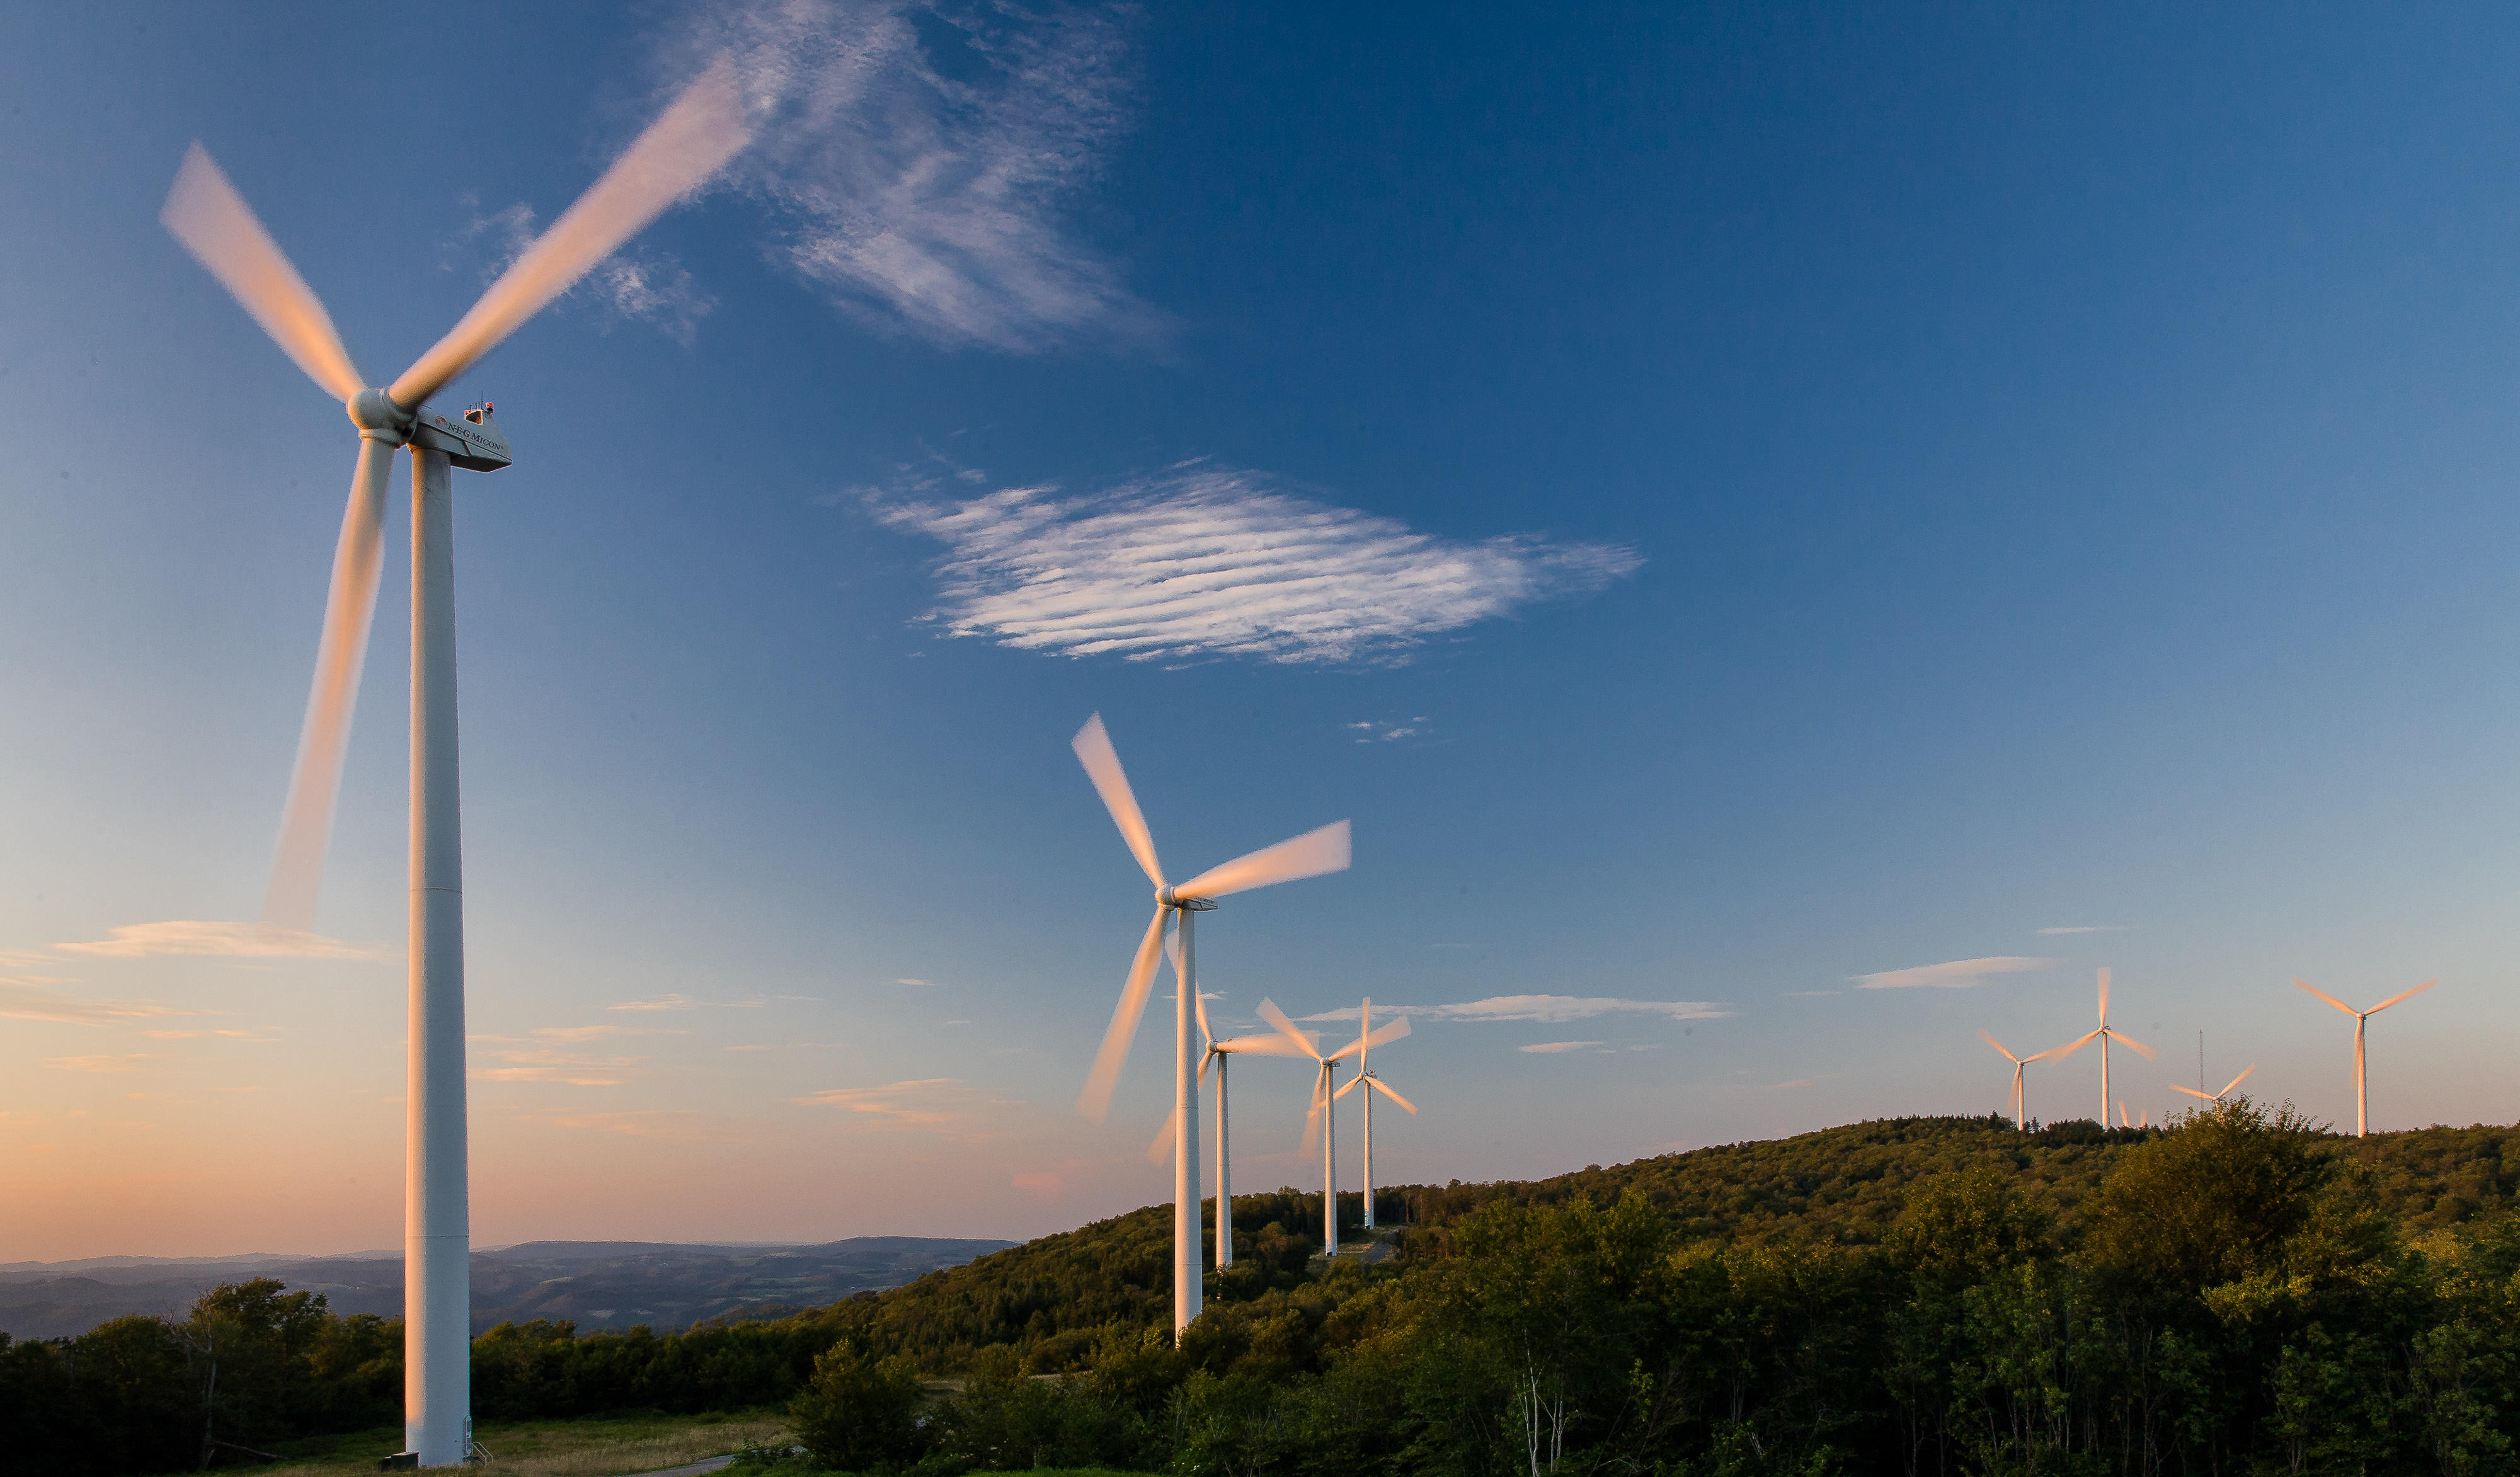 Wind farm turbines situated on a ridge top in the Appalachian mountains of West Virginia.